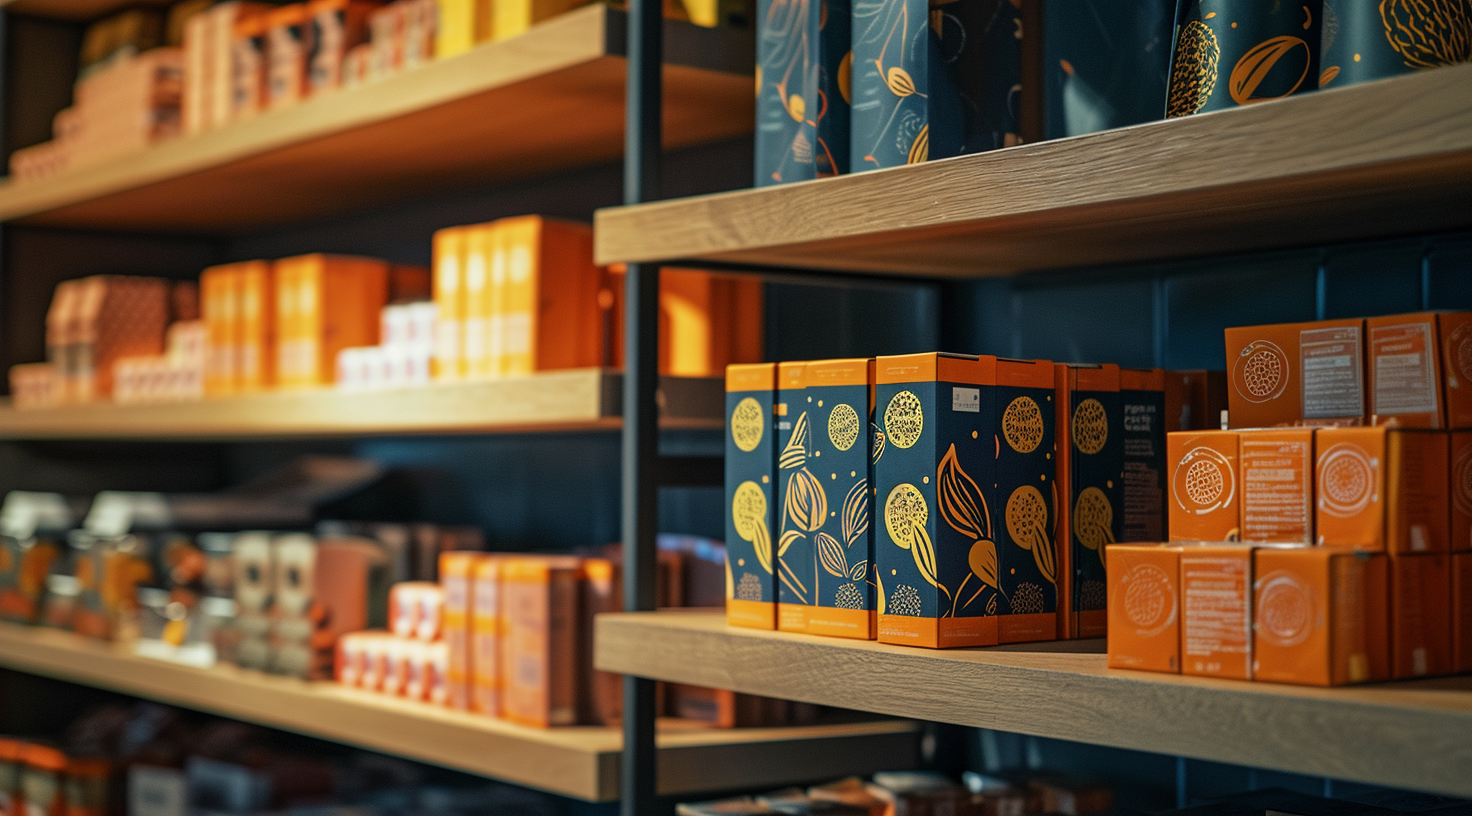 Artistically designed product packaging for artisanal goods displayed on wooden shelves in a boutique store.